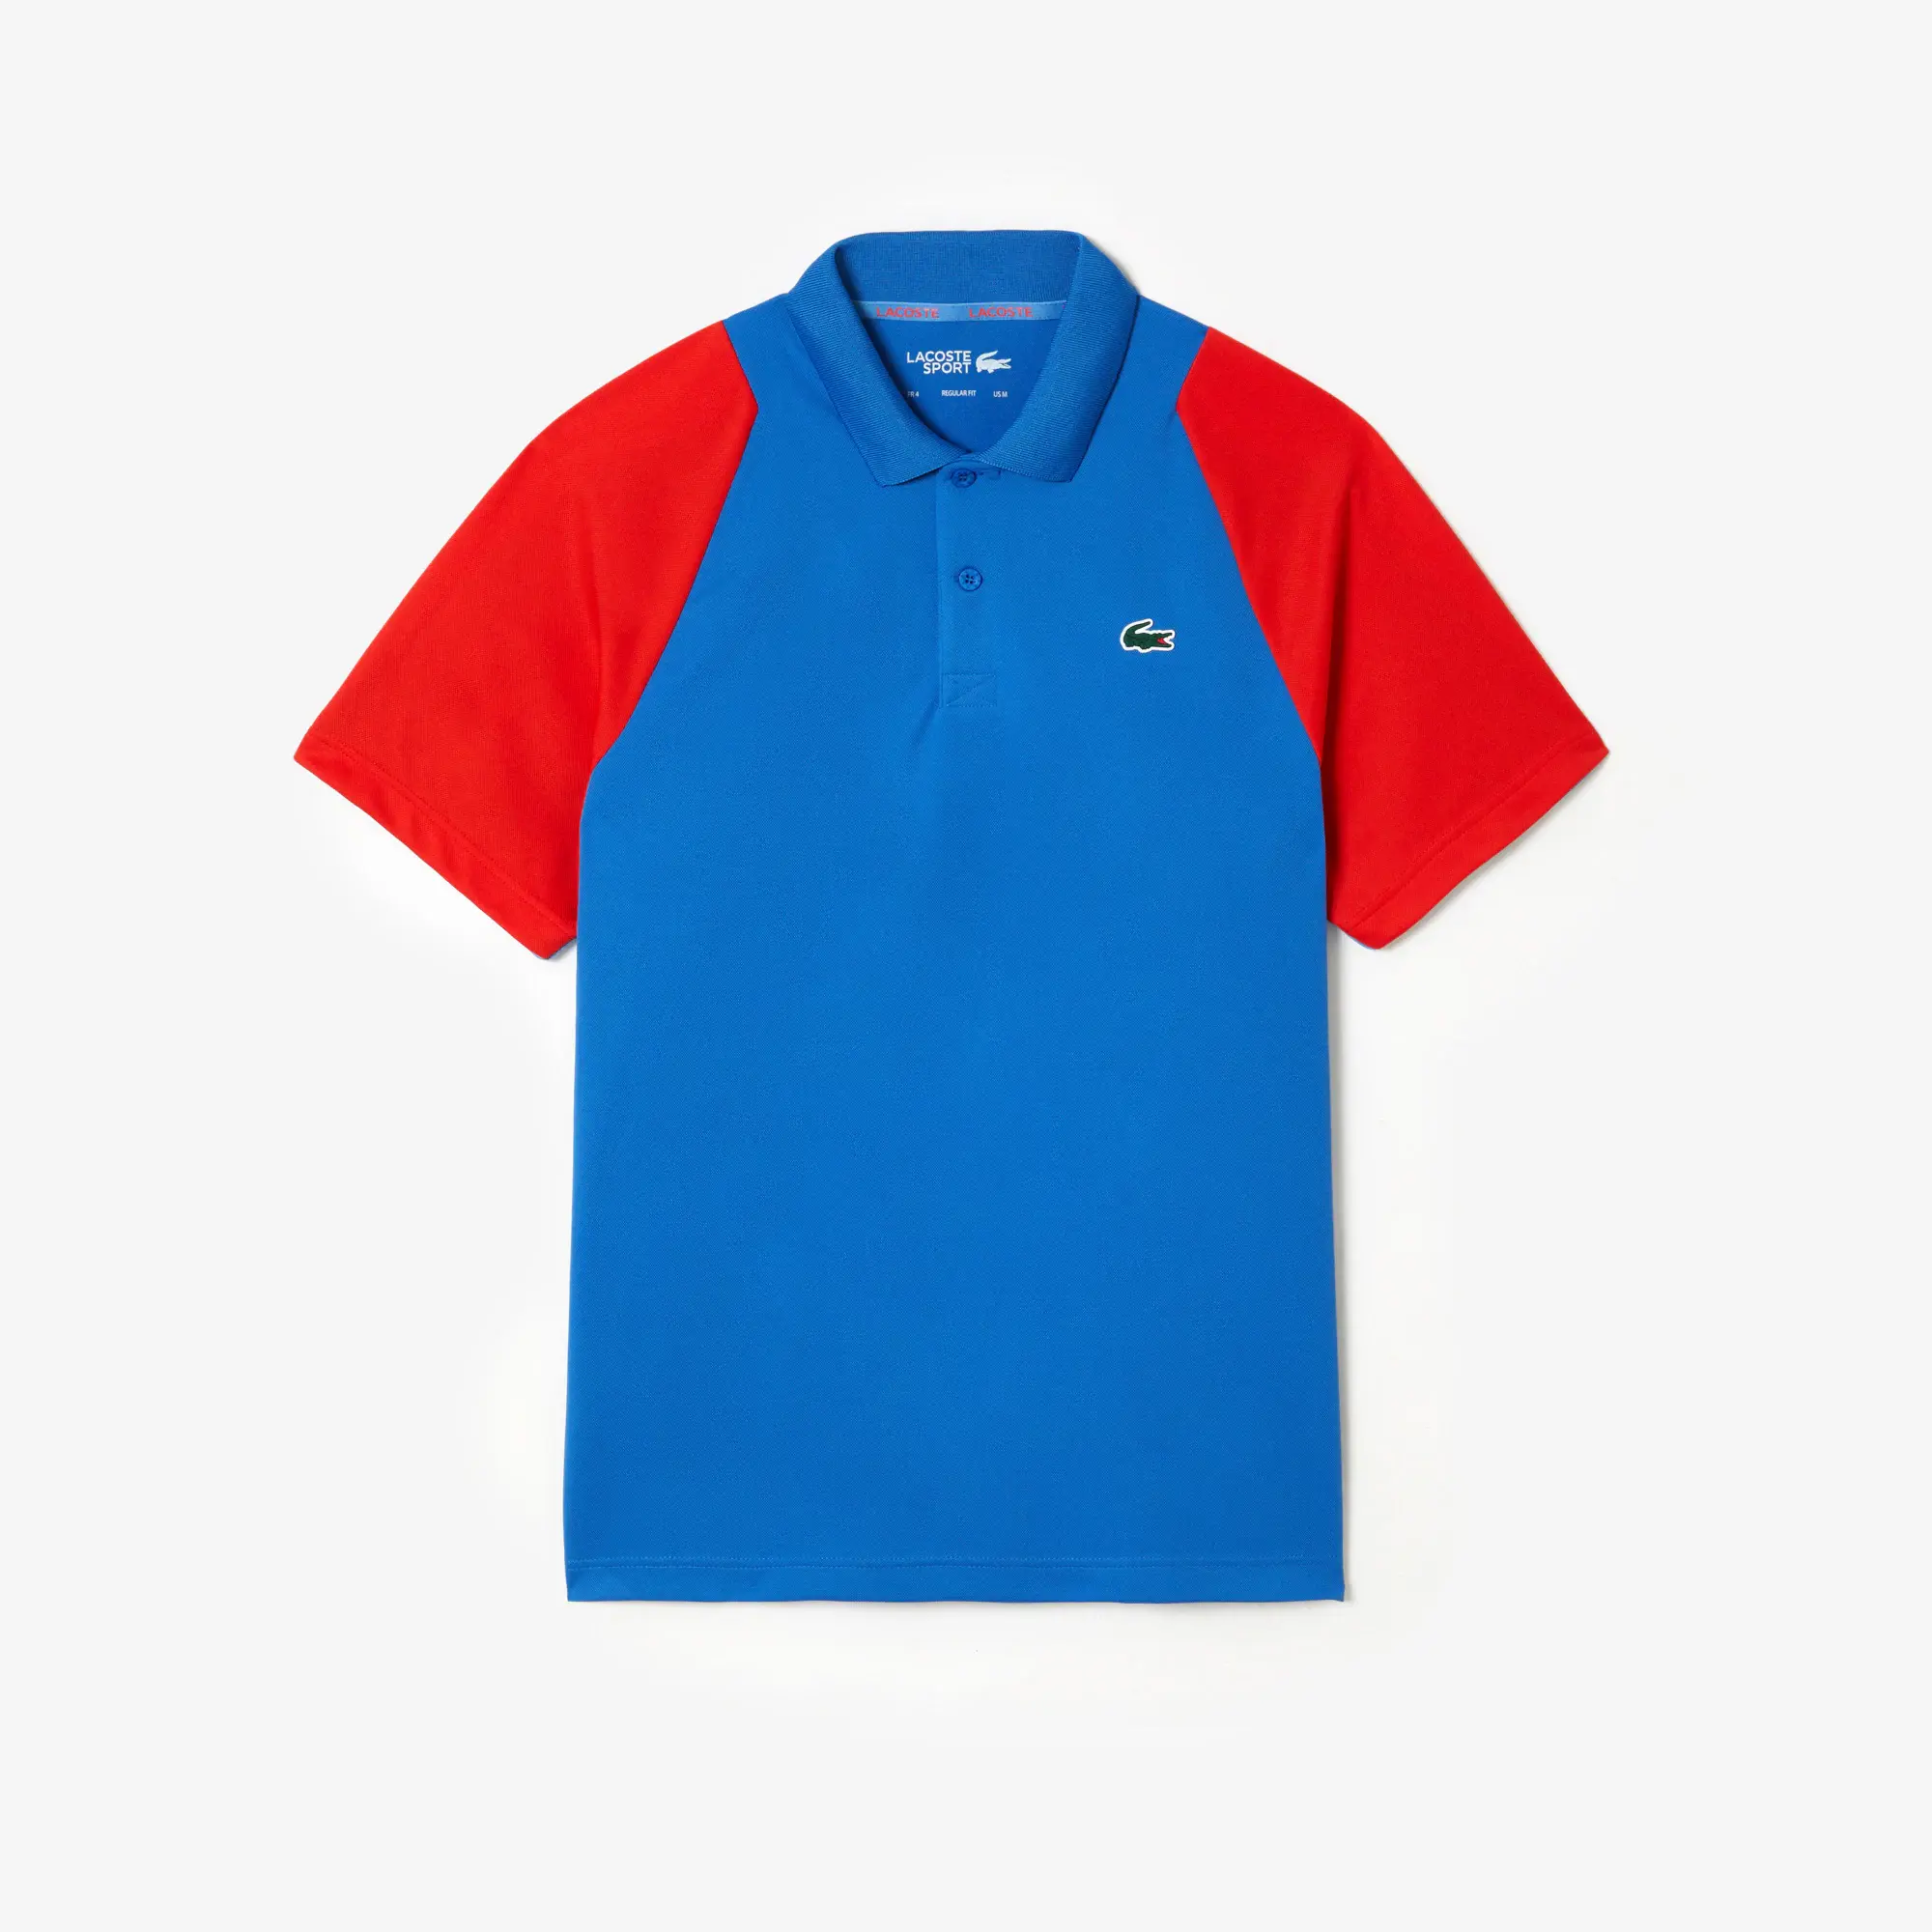 Lacoste Men’s Tennis Recycled Polyester Polo Shirt. 2